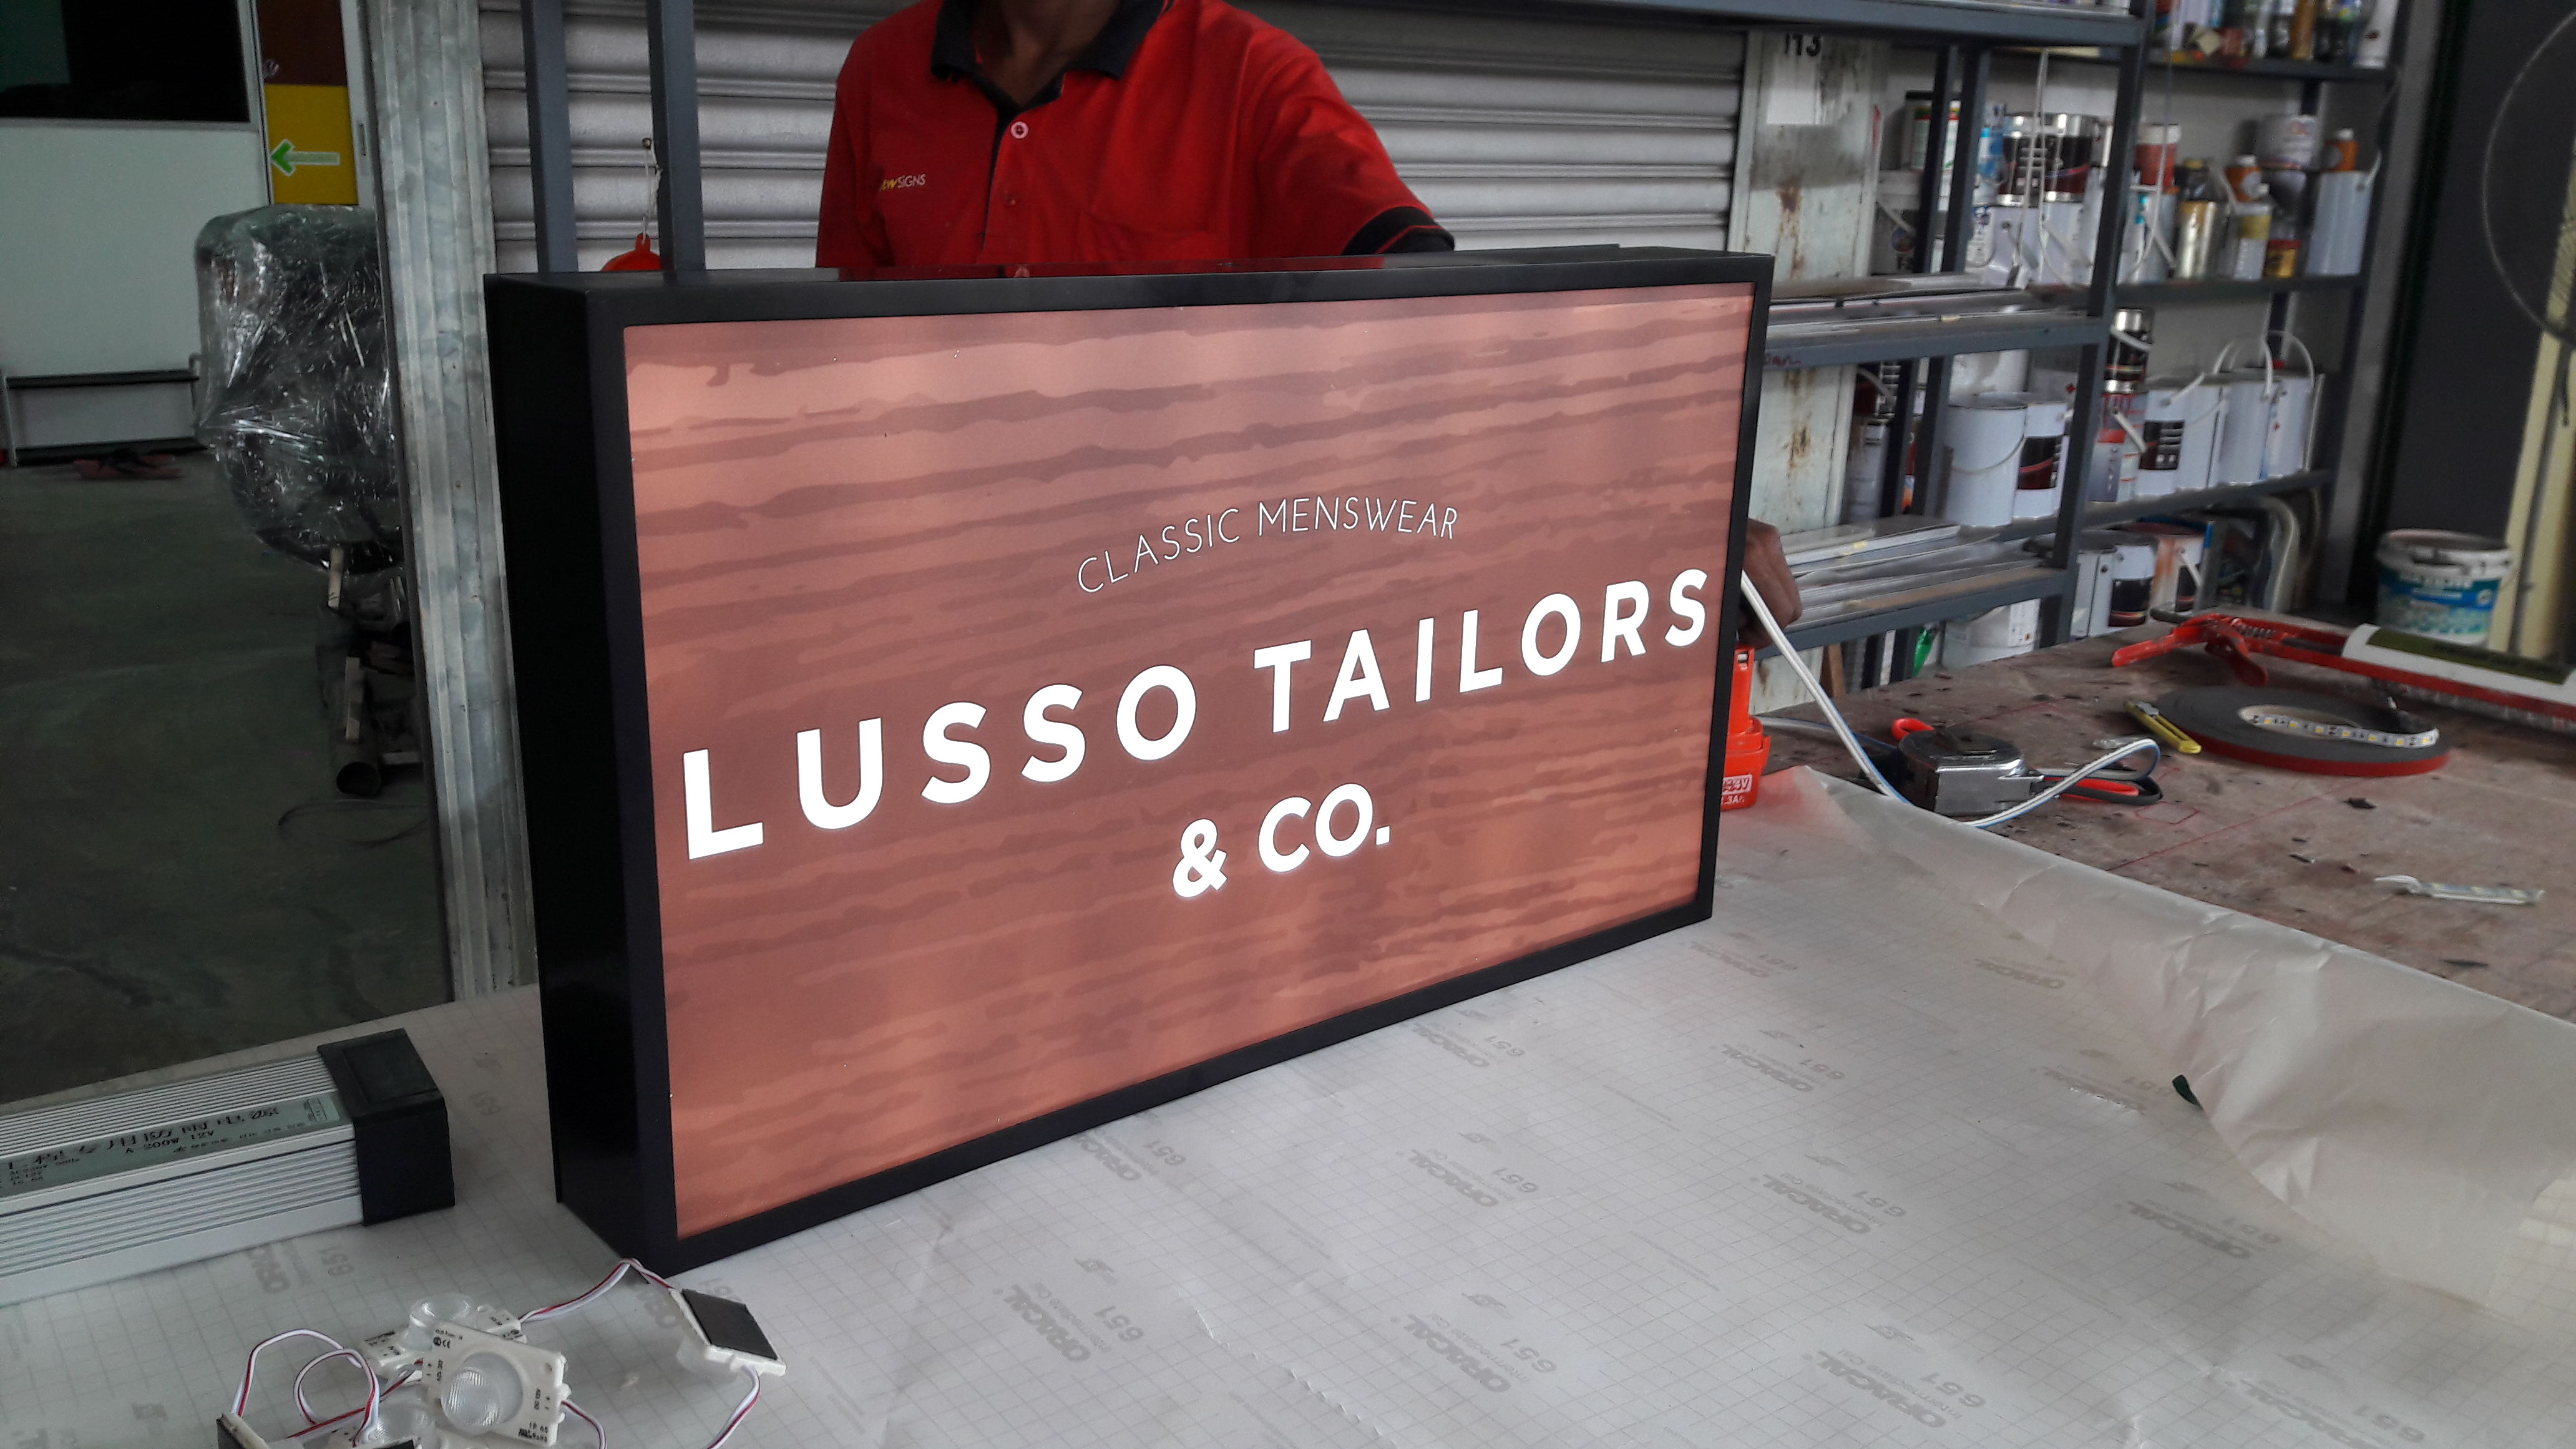 Lusso Tailors